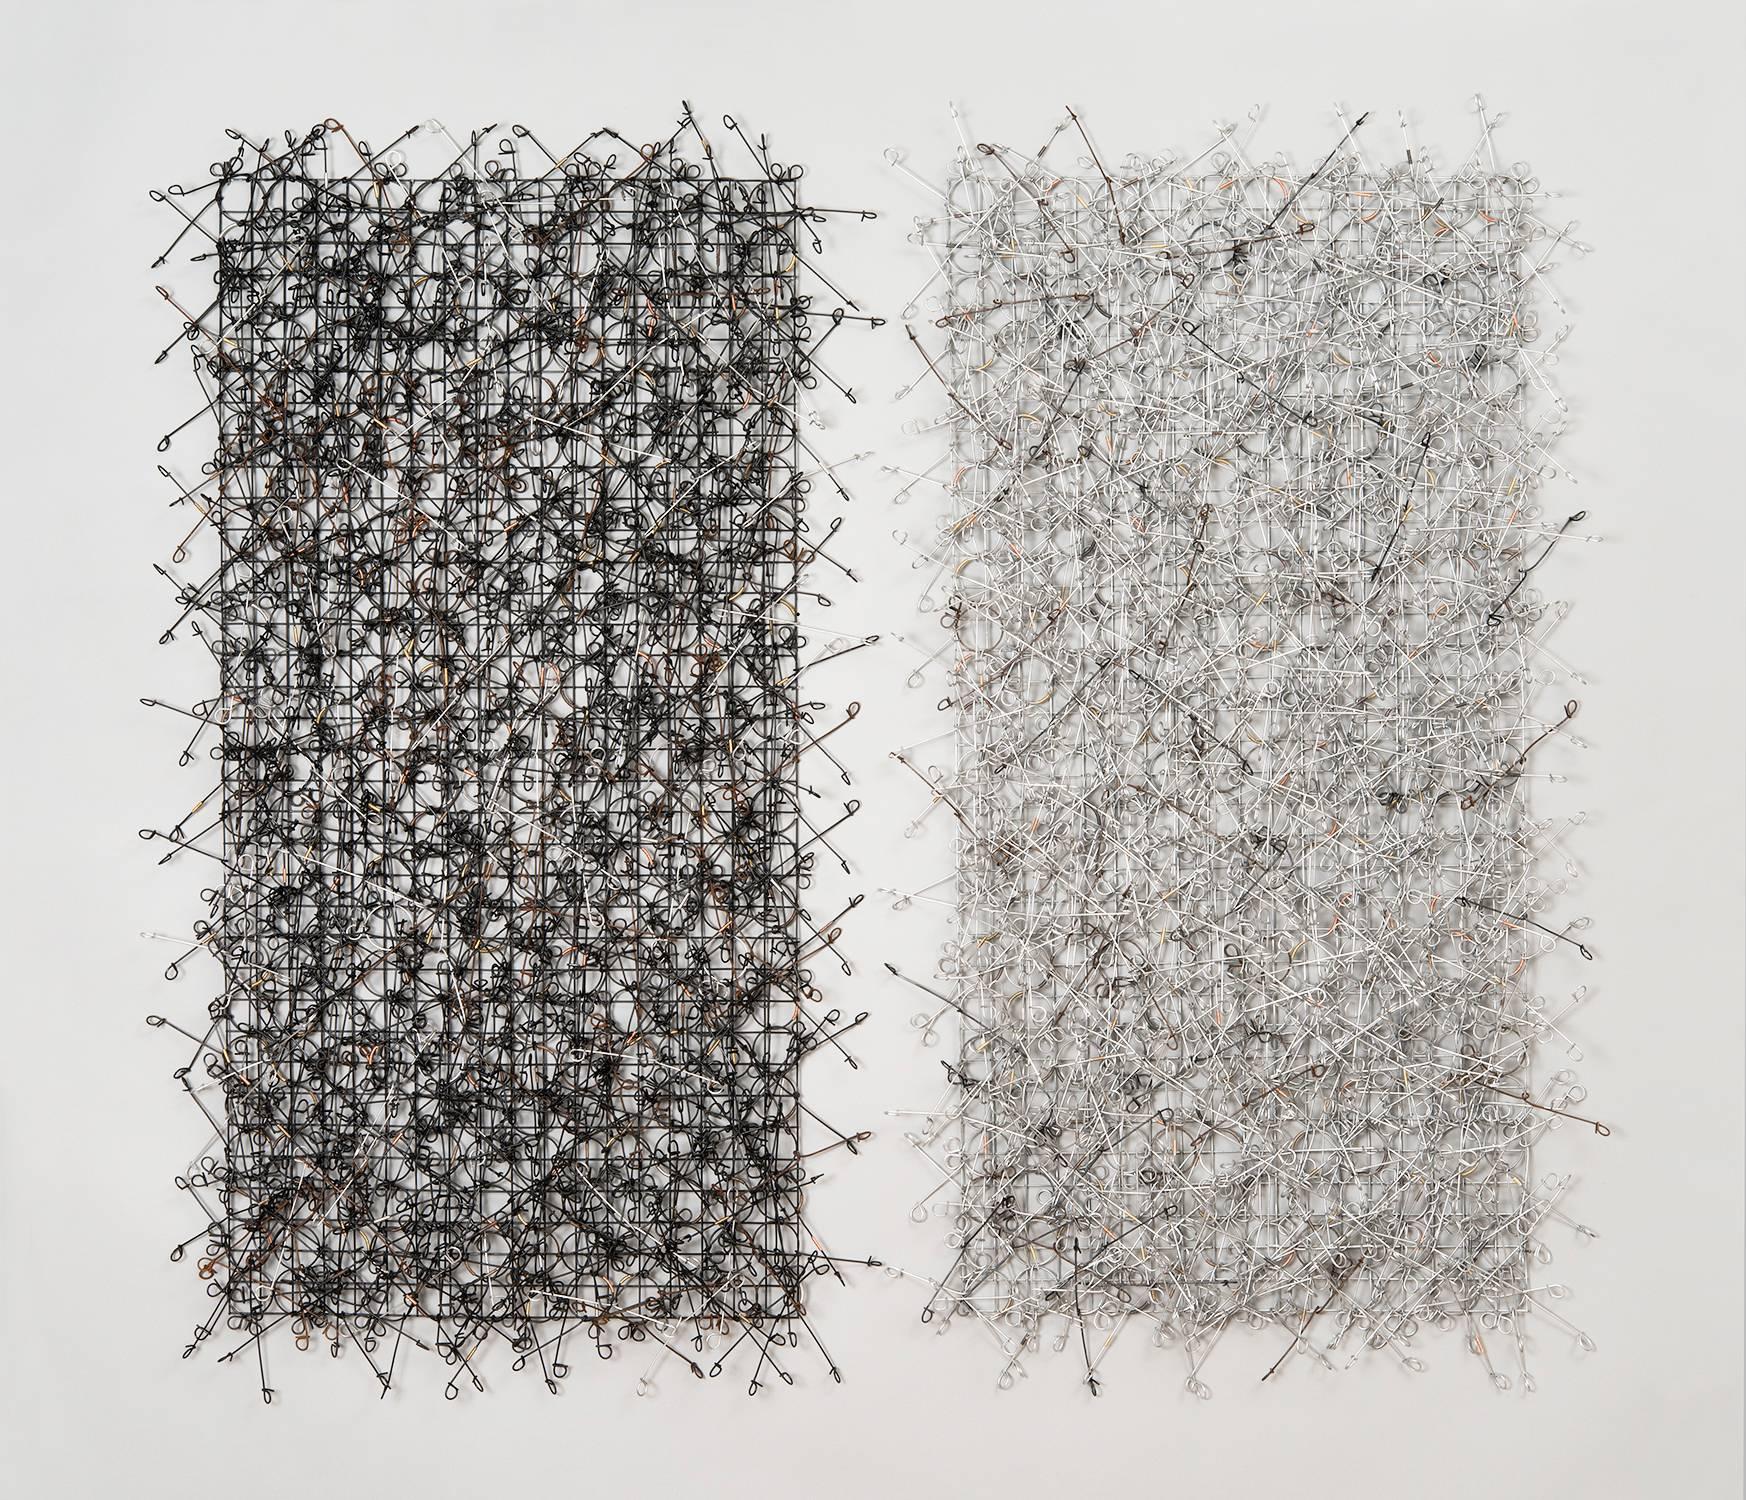 John Garrett Abstract Sculpture - "Circle Grid Diptych", Contemporary Wall Mounting Sculpture Composed of Metals